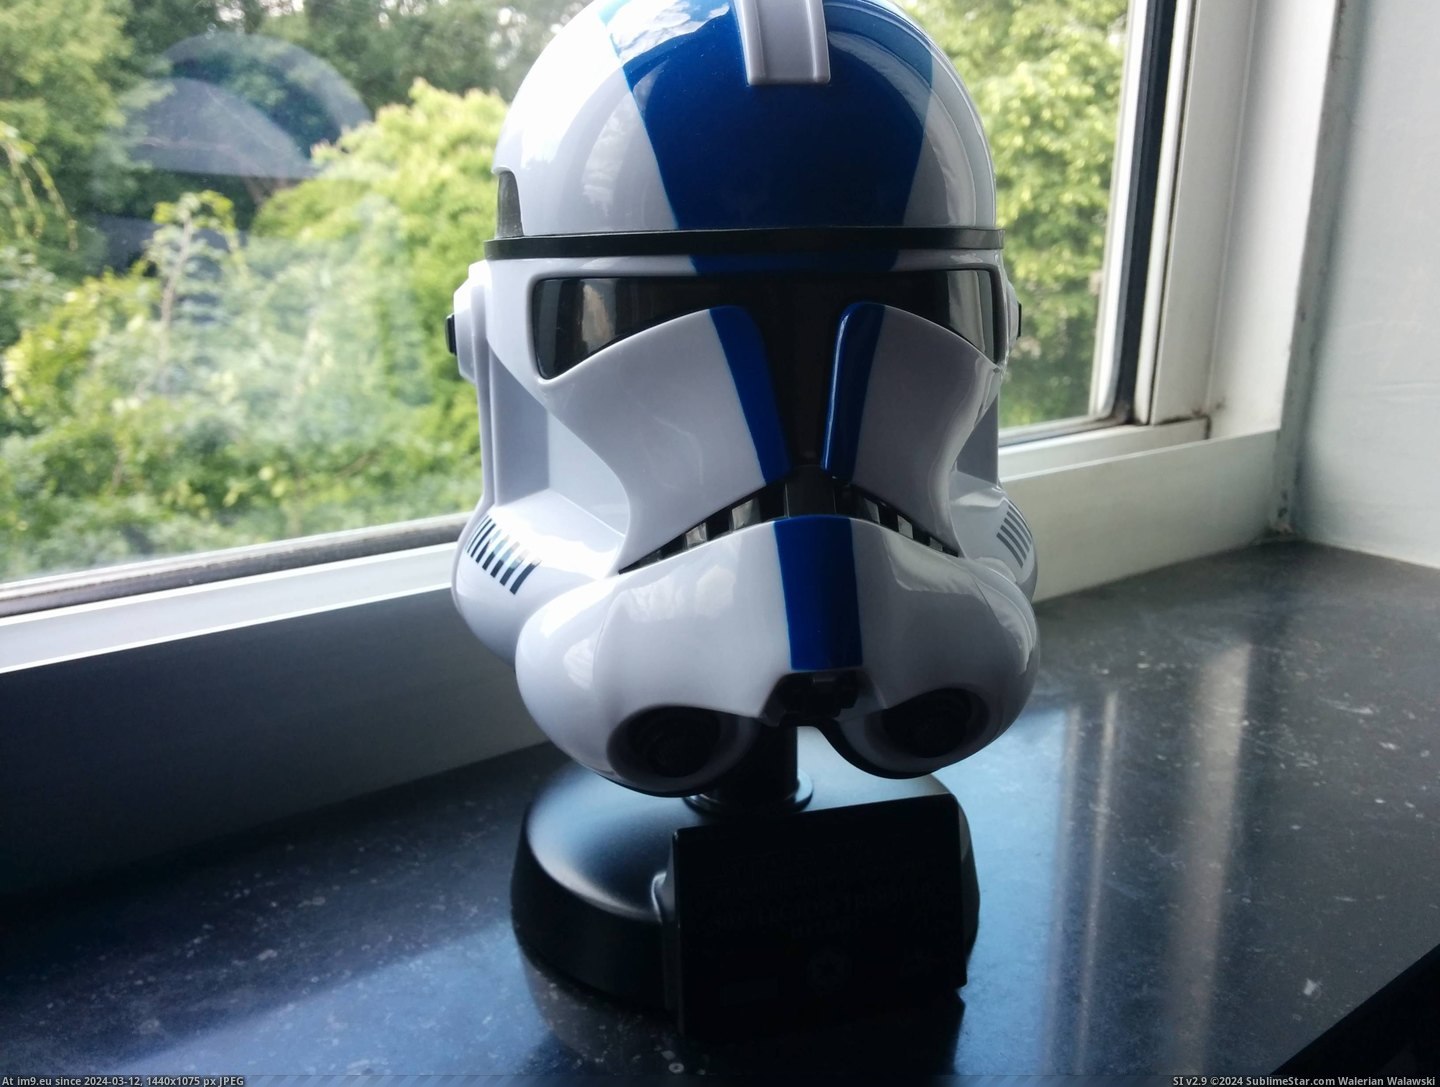 #Replica #Helmet #501st #Accurate [Mildlyinteresting] Today I found out even the inside of my 501st helmet replica is accurate. 1 Pic. (Изображение из альбом My r/MILDLYINTERESTING favs))